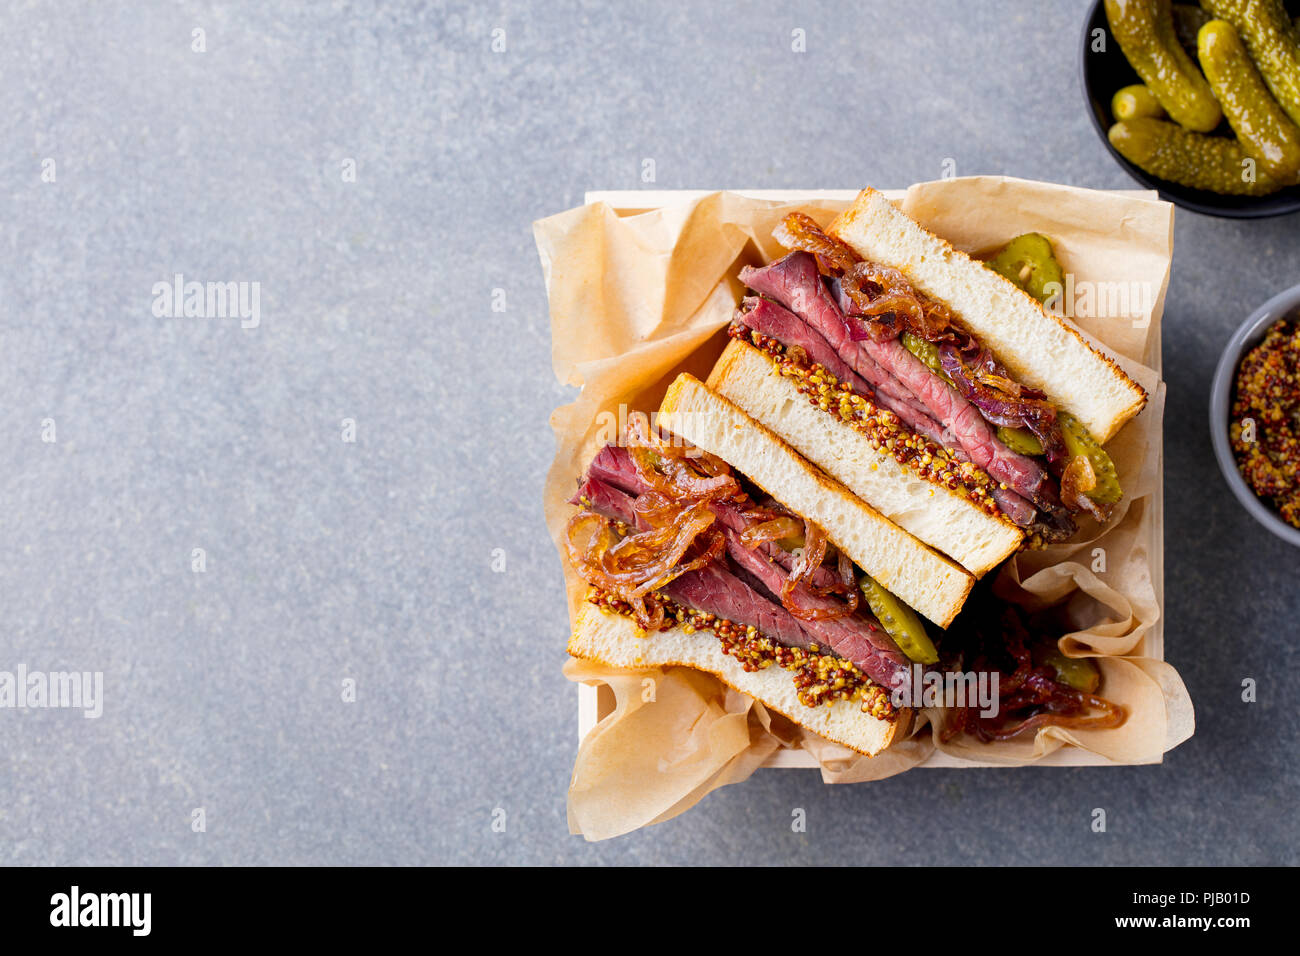 Sandwich with roast beef in wooden box. Top view. Copy space. Stock Photo